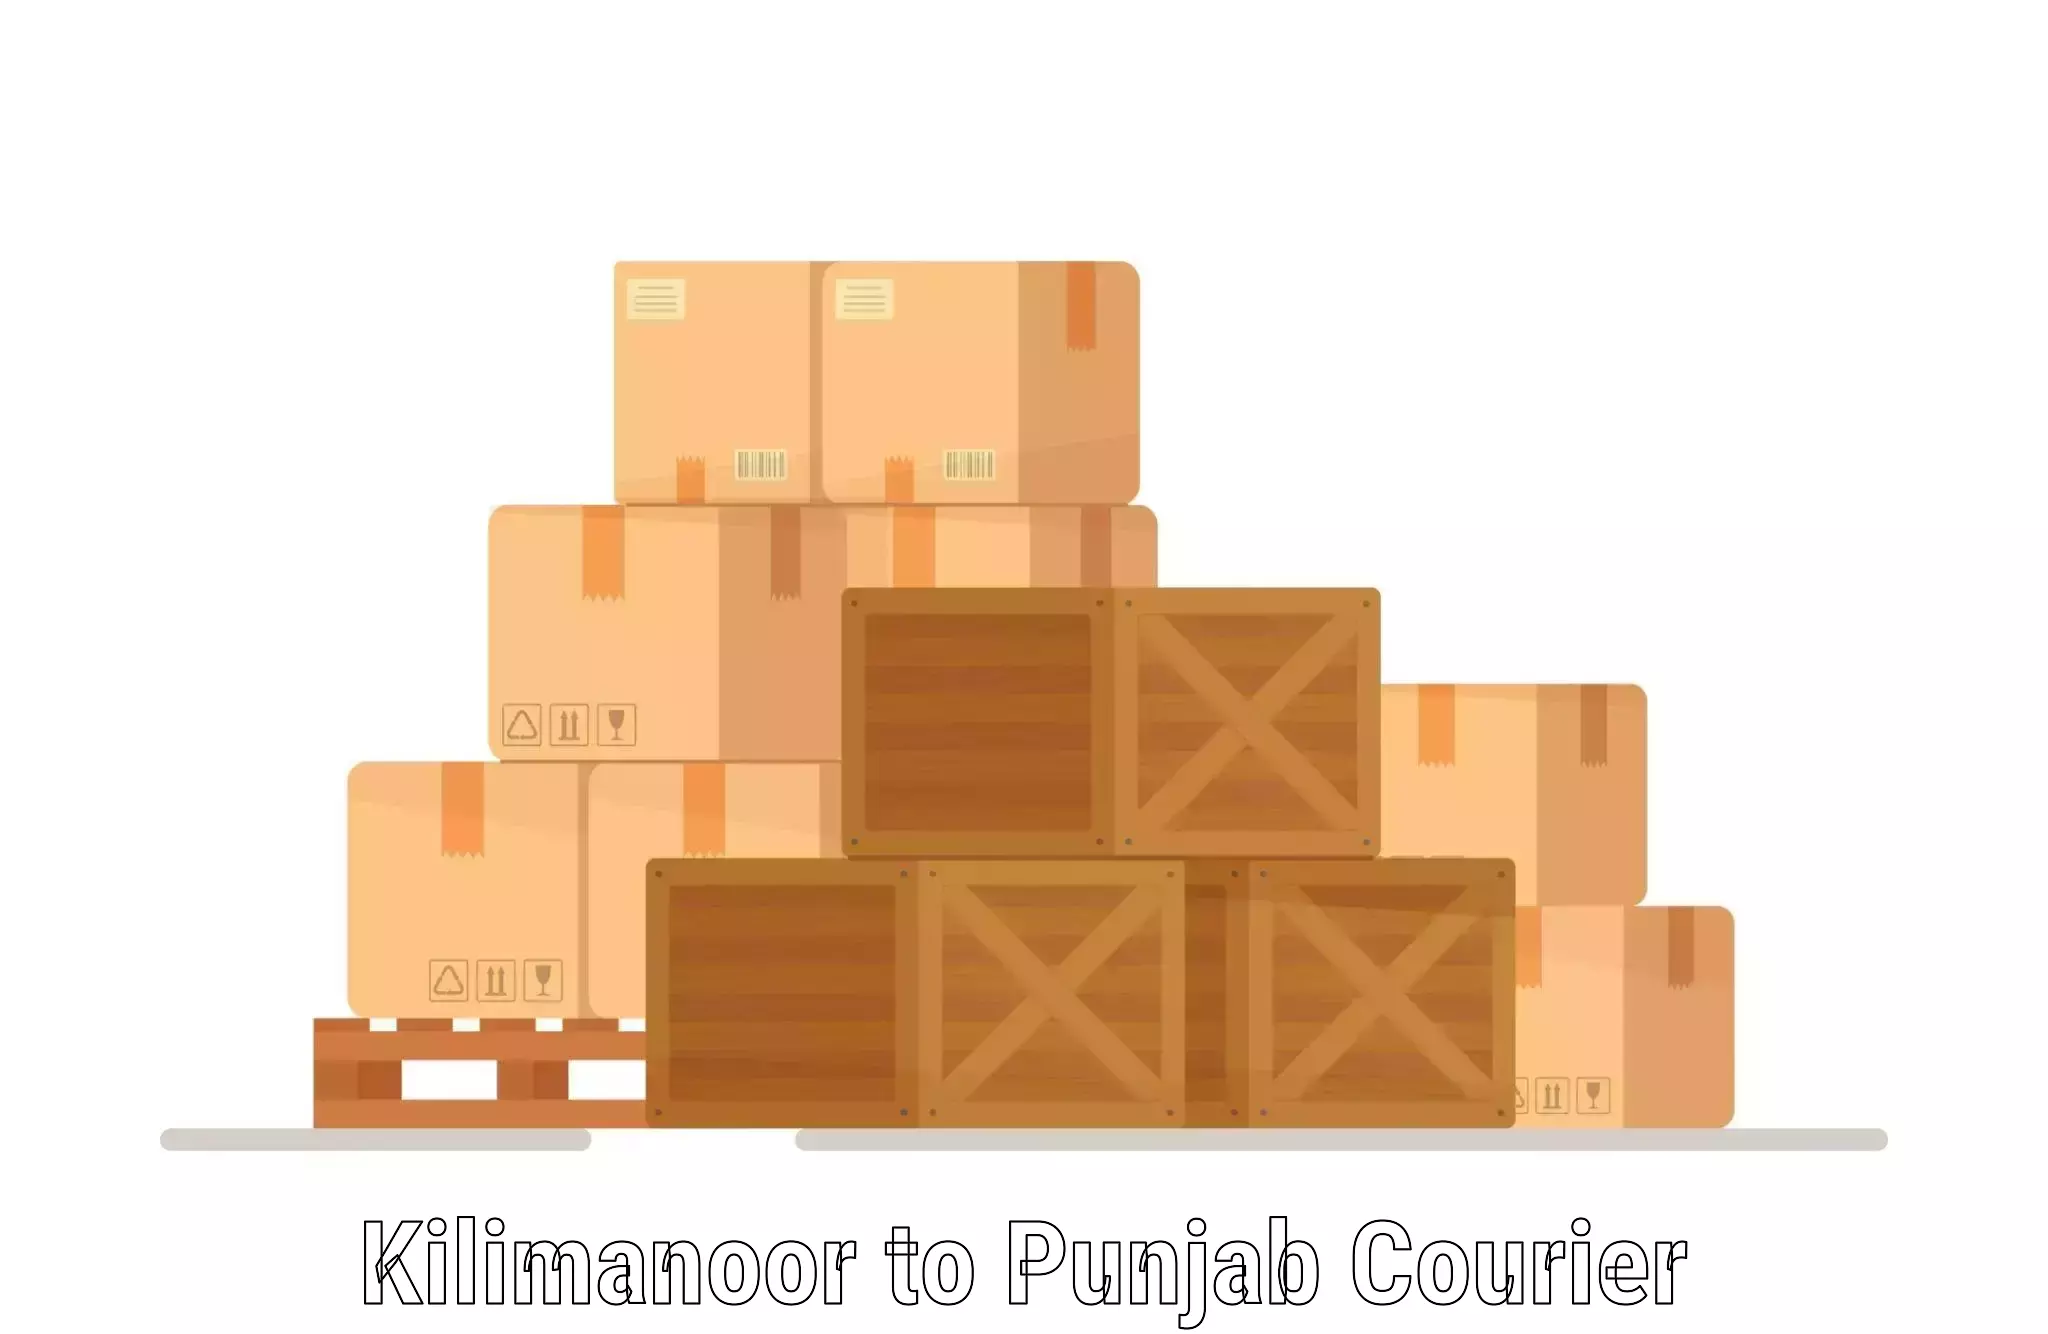 Customer-oriented courier services in Kilimanoor to Patiala